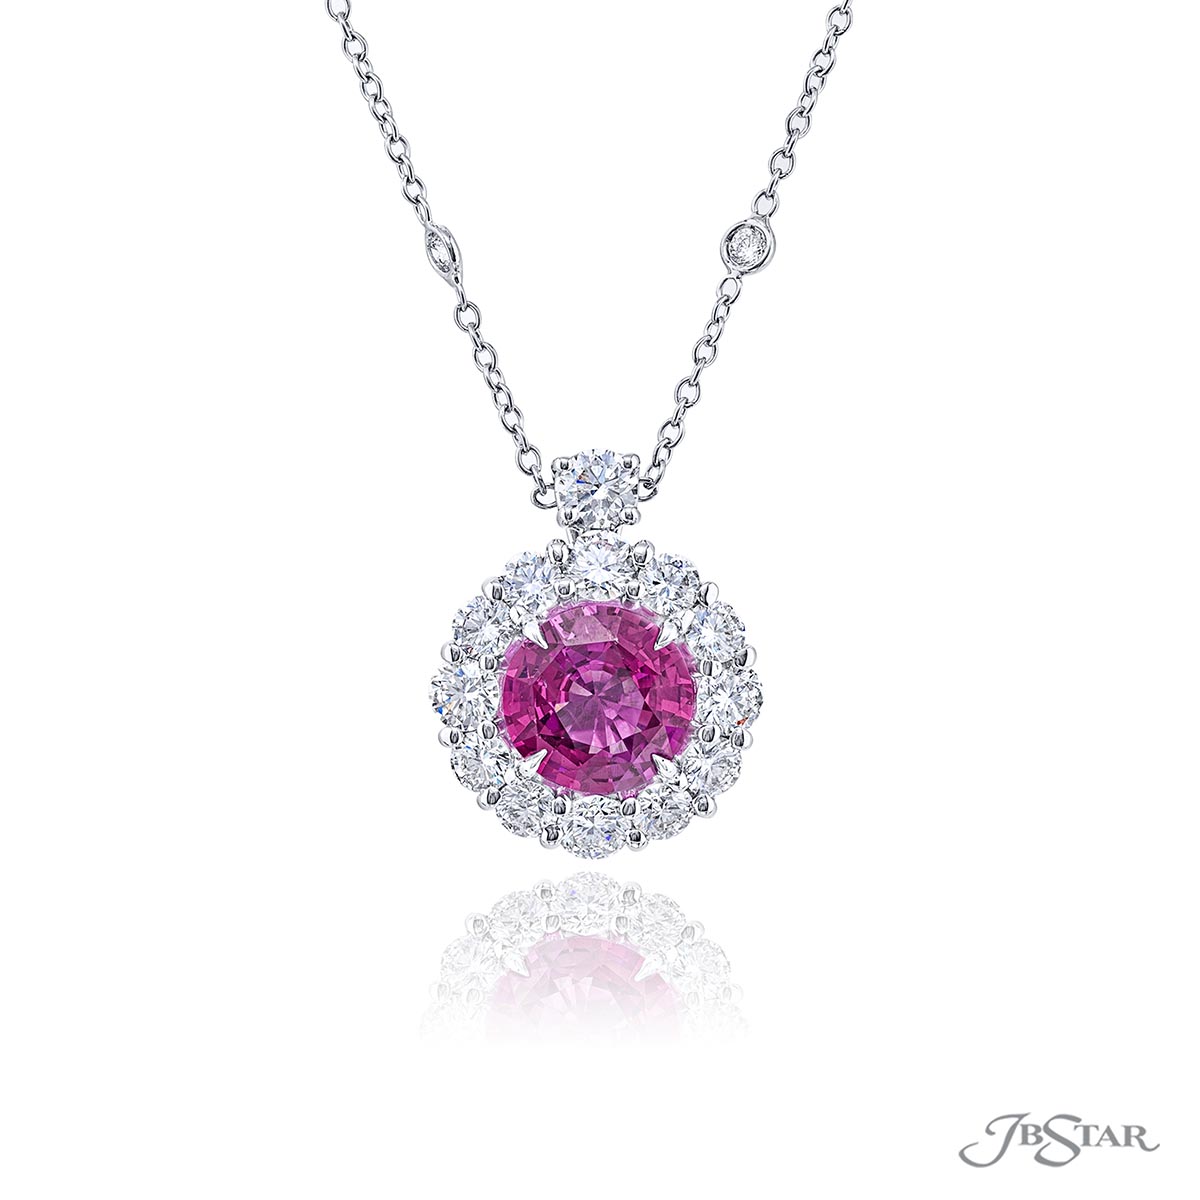 Pink Sapphire and Diamond Chloette Necklace